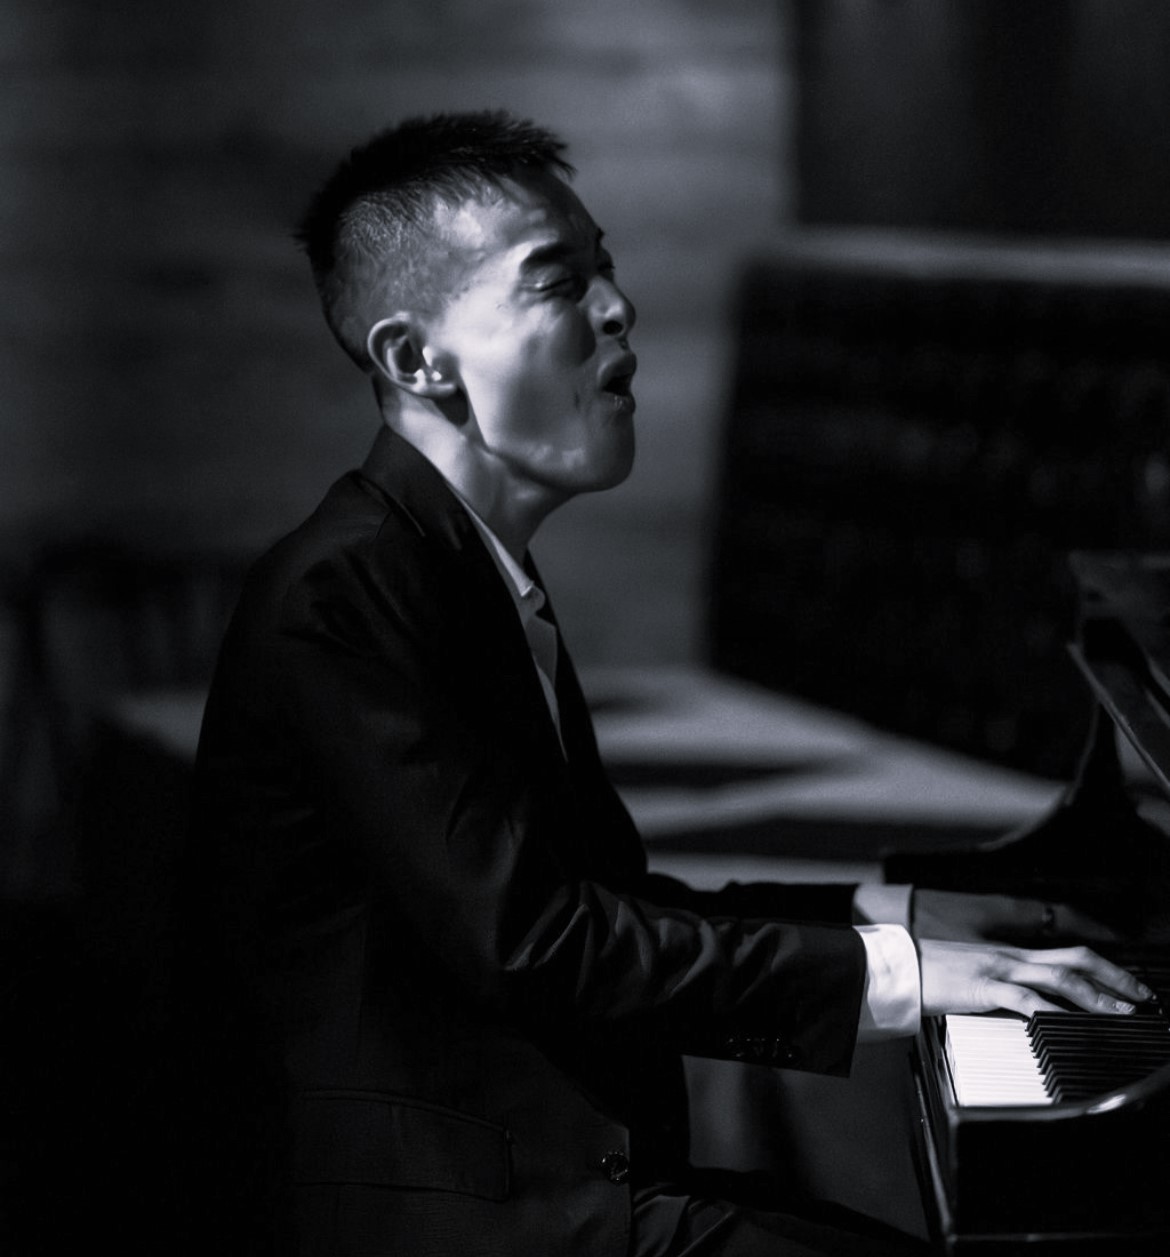 eric playing piano (black and white)